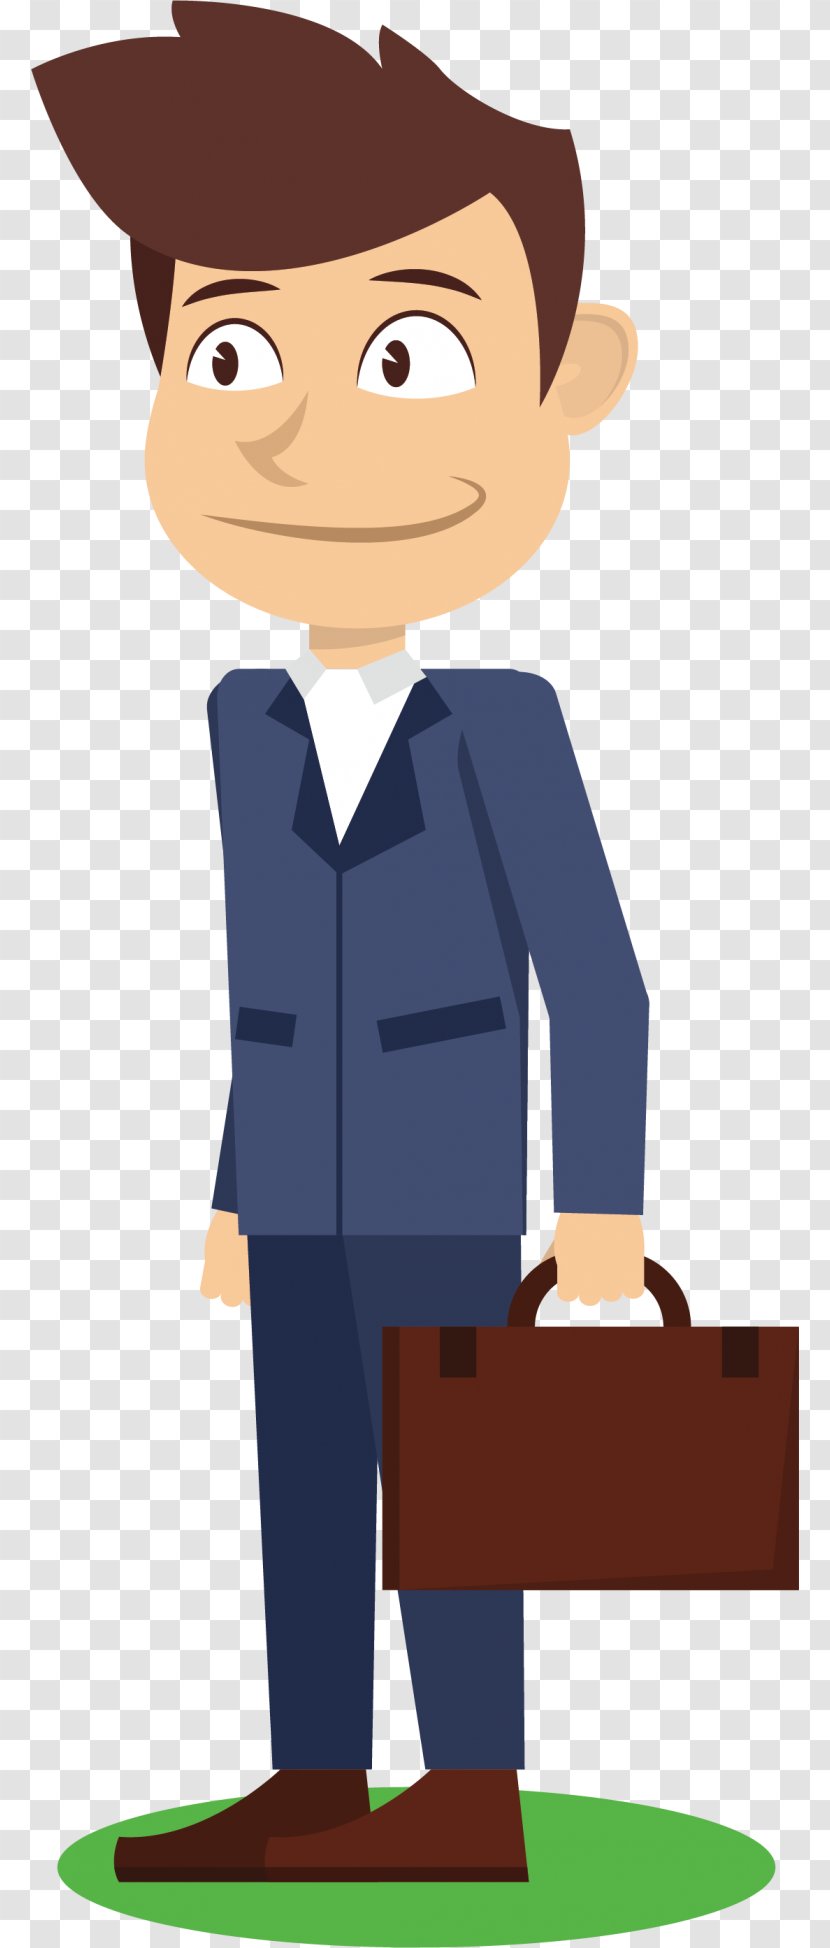 Character Cartoon - Professional - Animation Transparent PNG